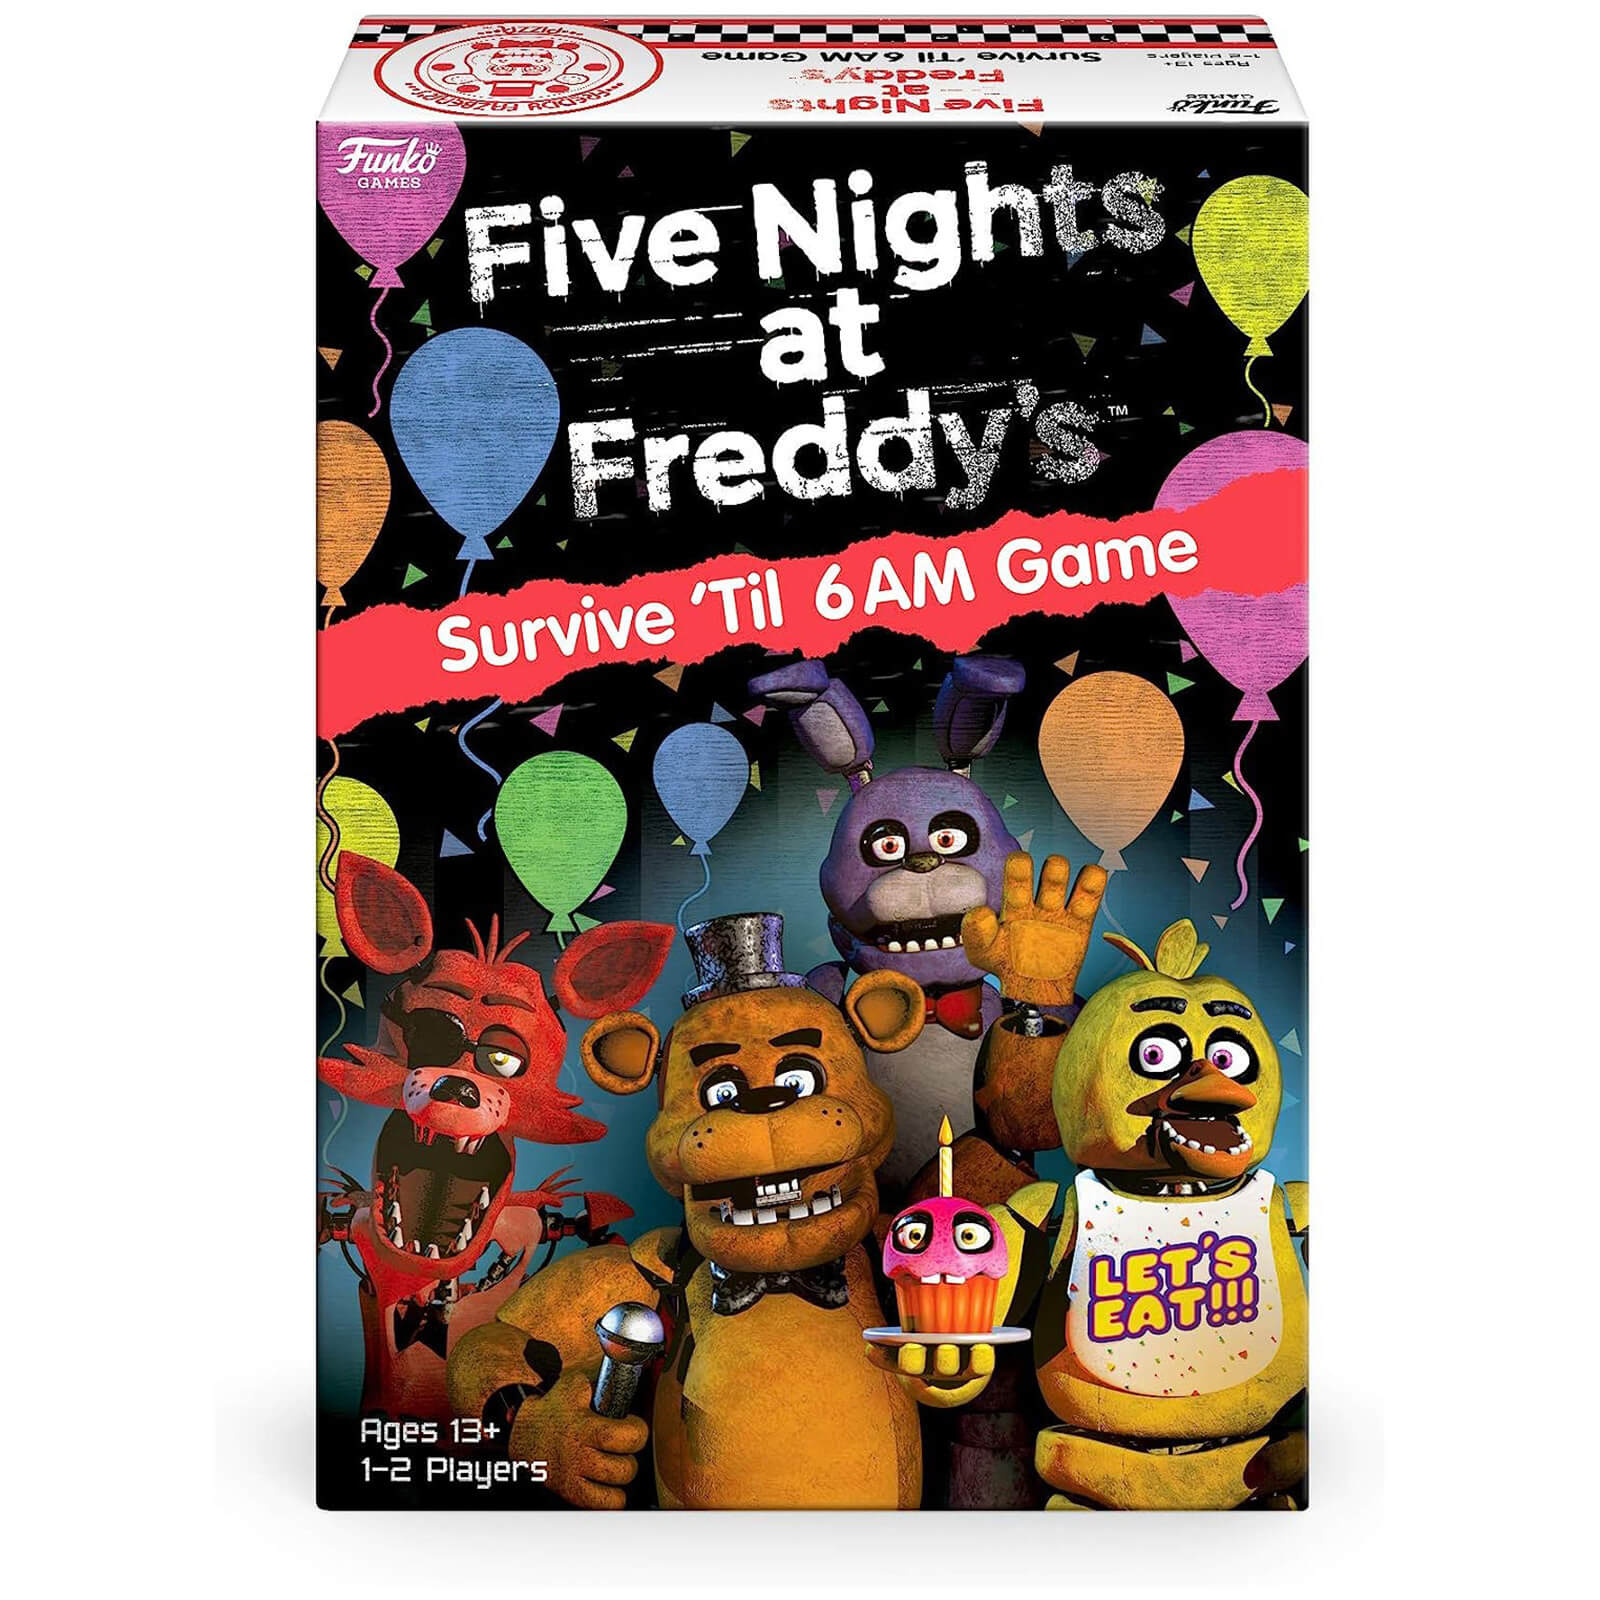 Signature Games: Five Nights at Freddy's Game product